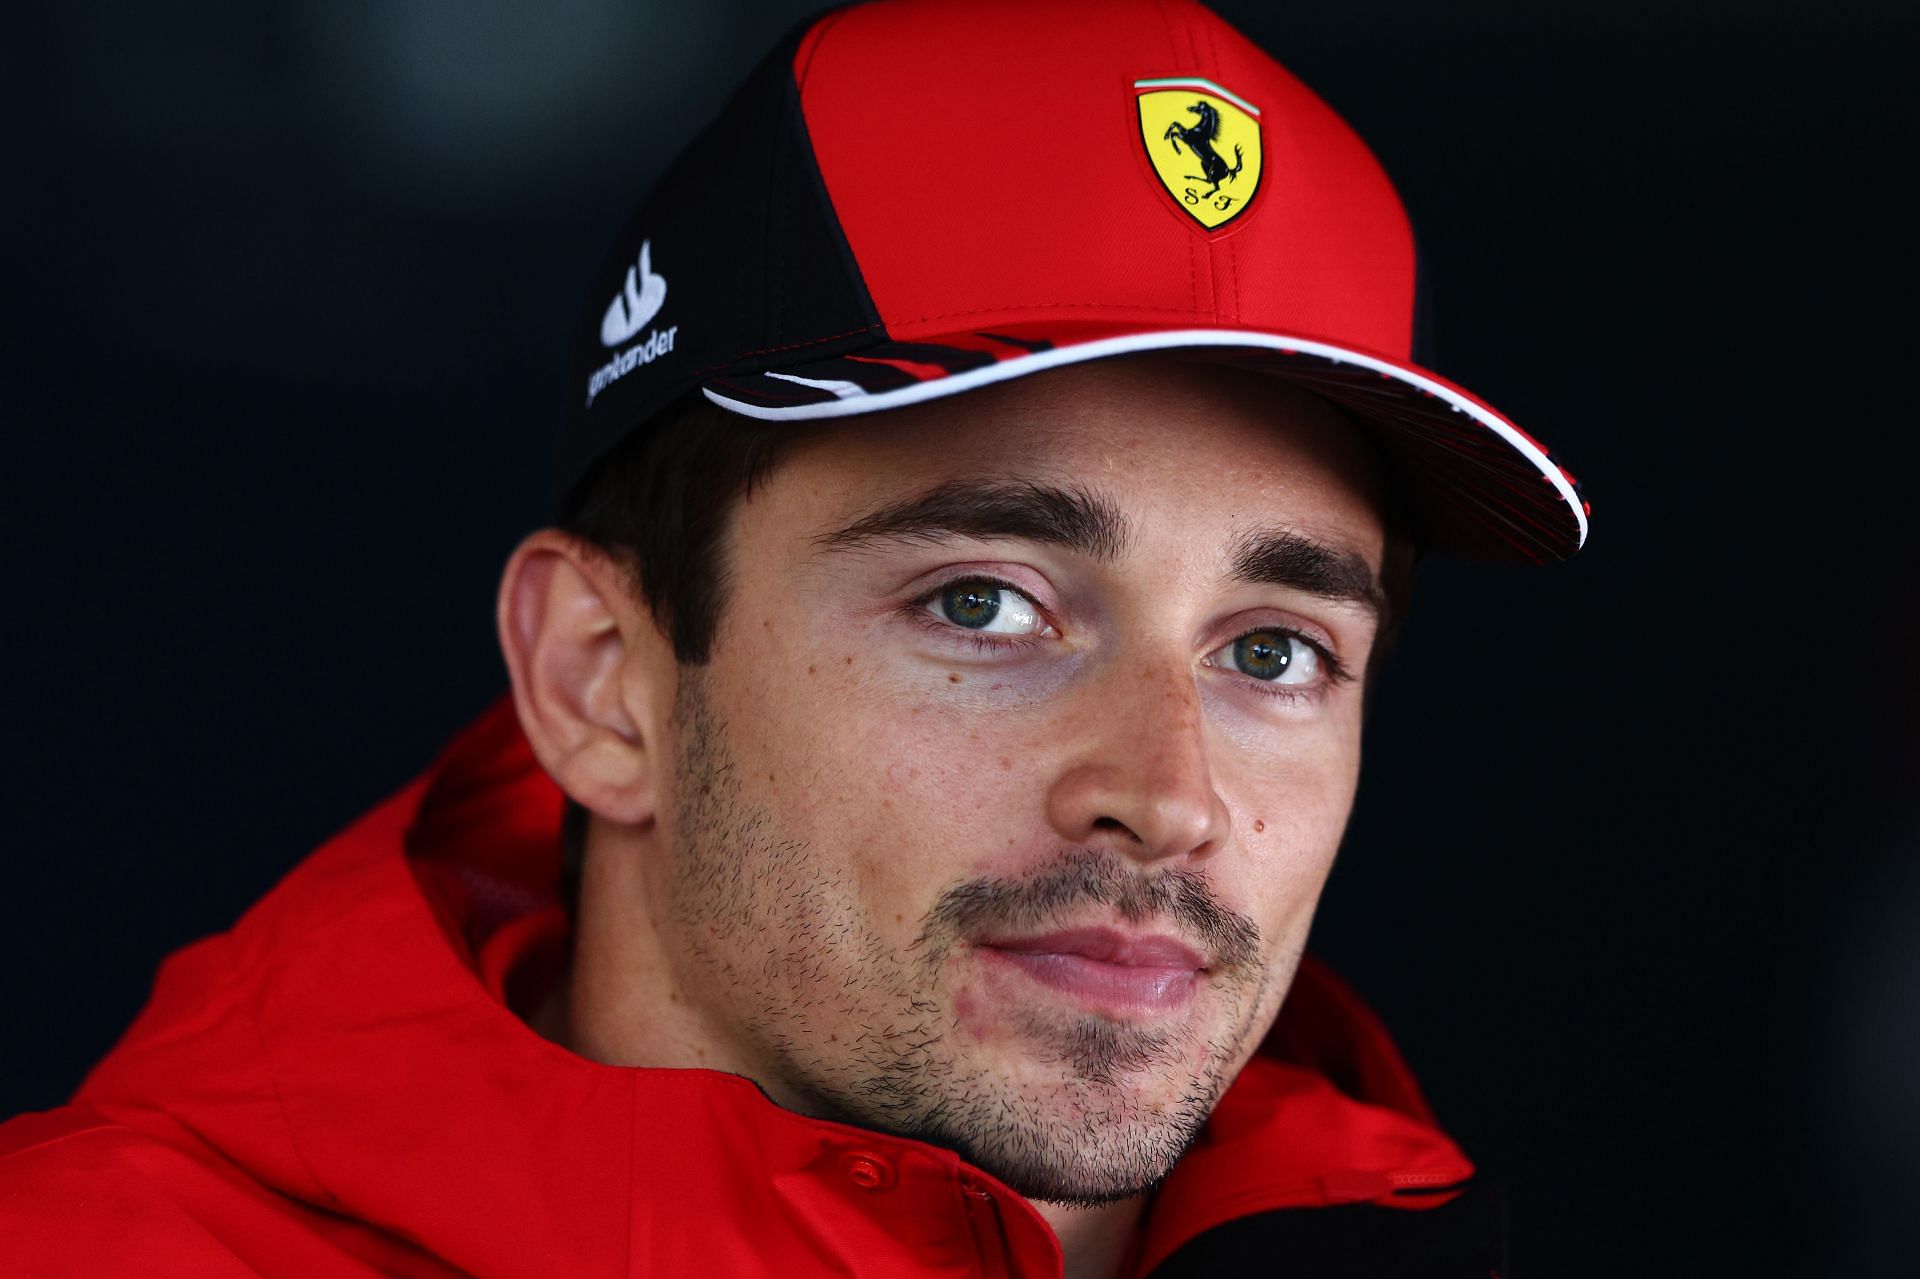 Charles Leclerc lost out on a win at the British GP because of a strategic mistake by the team